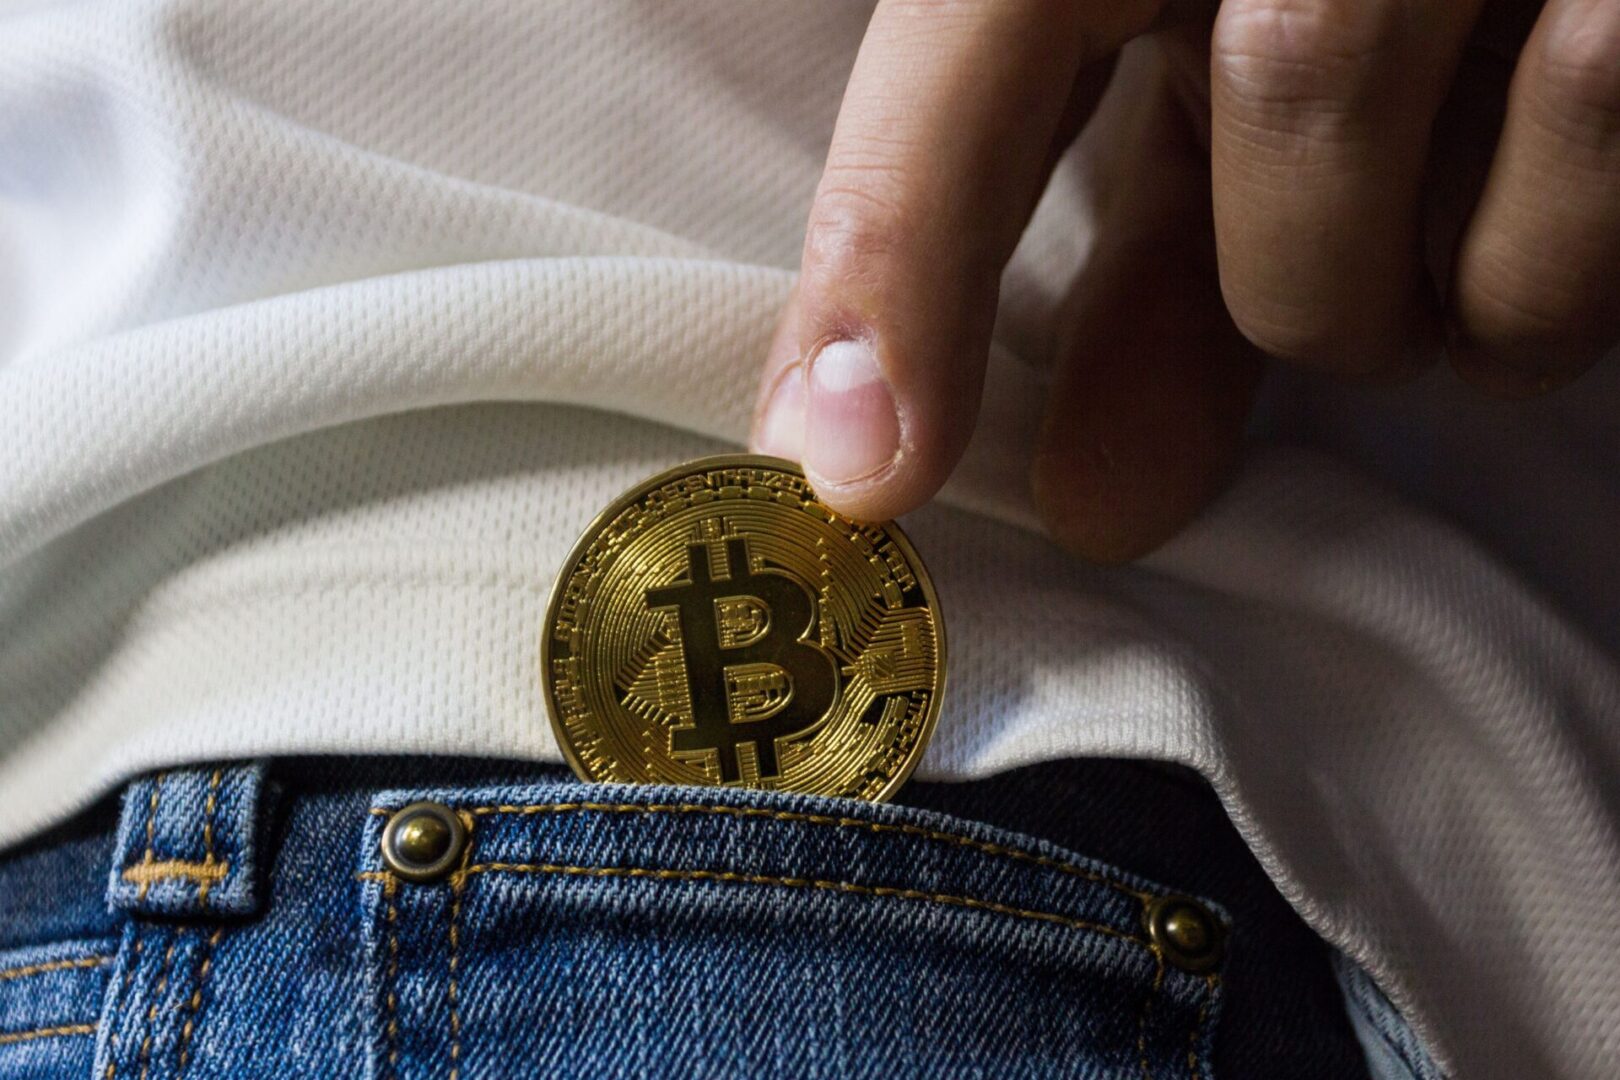 A person is holding onto a coin in their pocket.